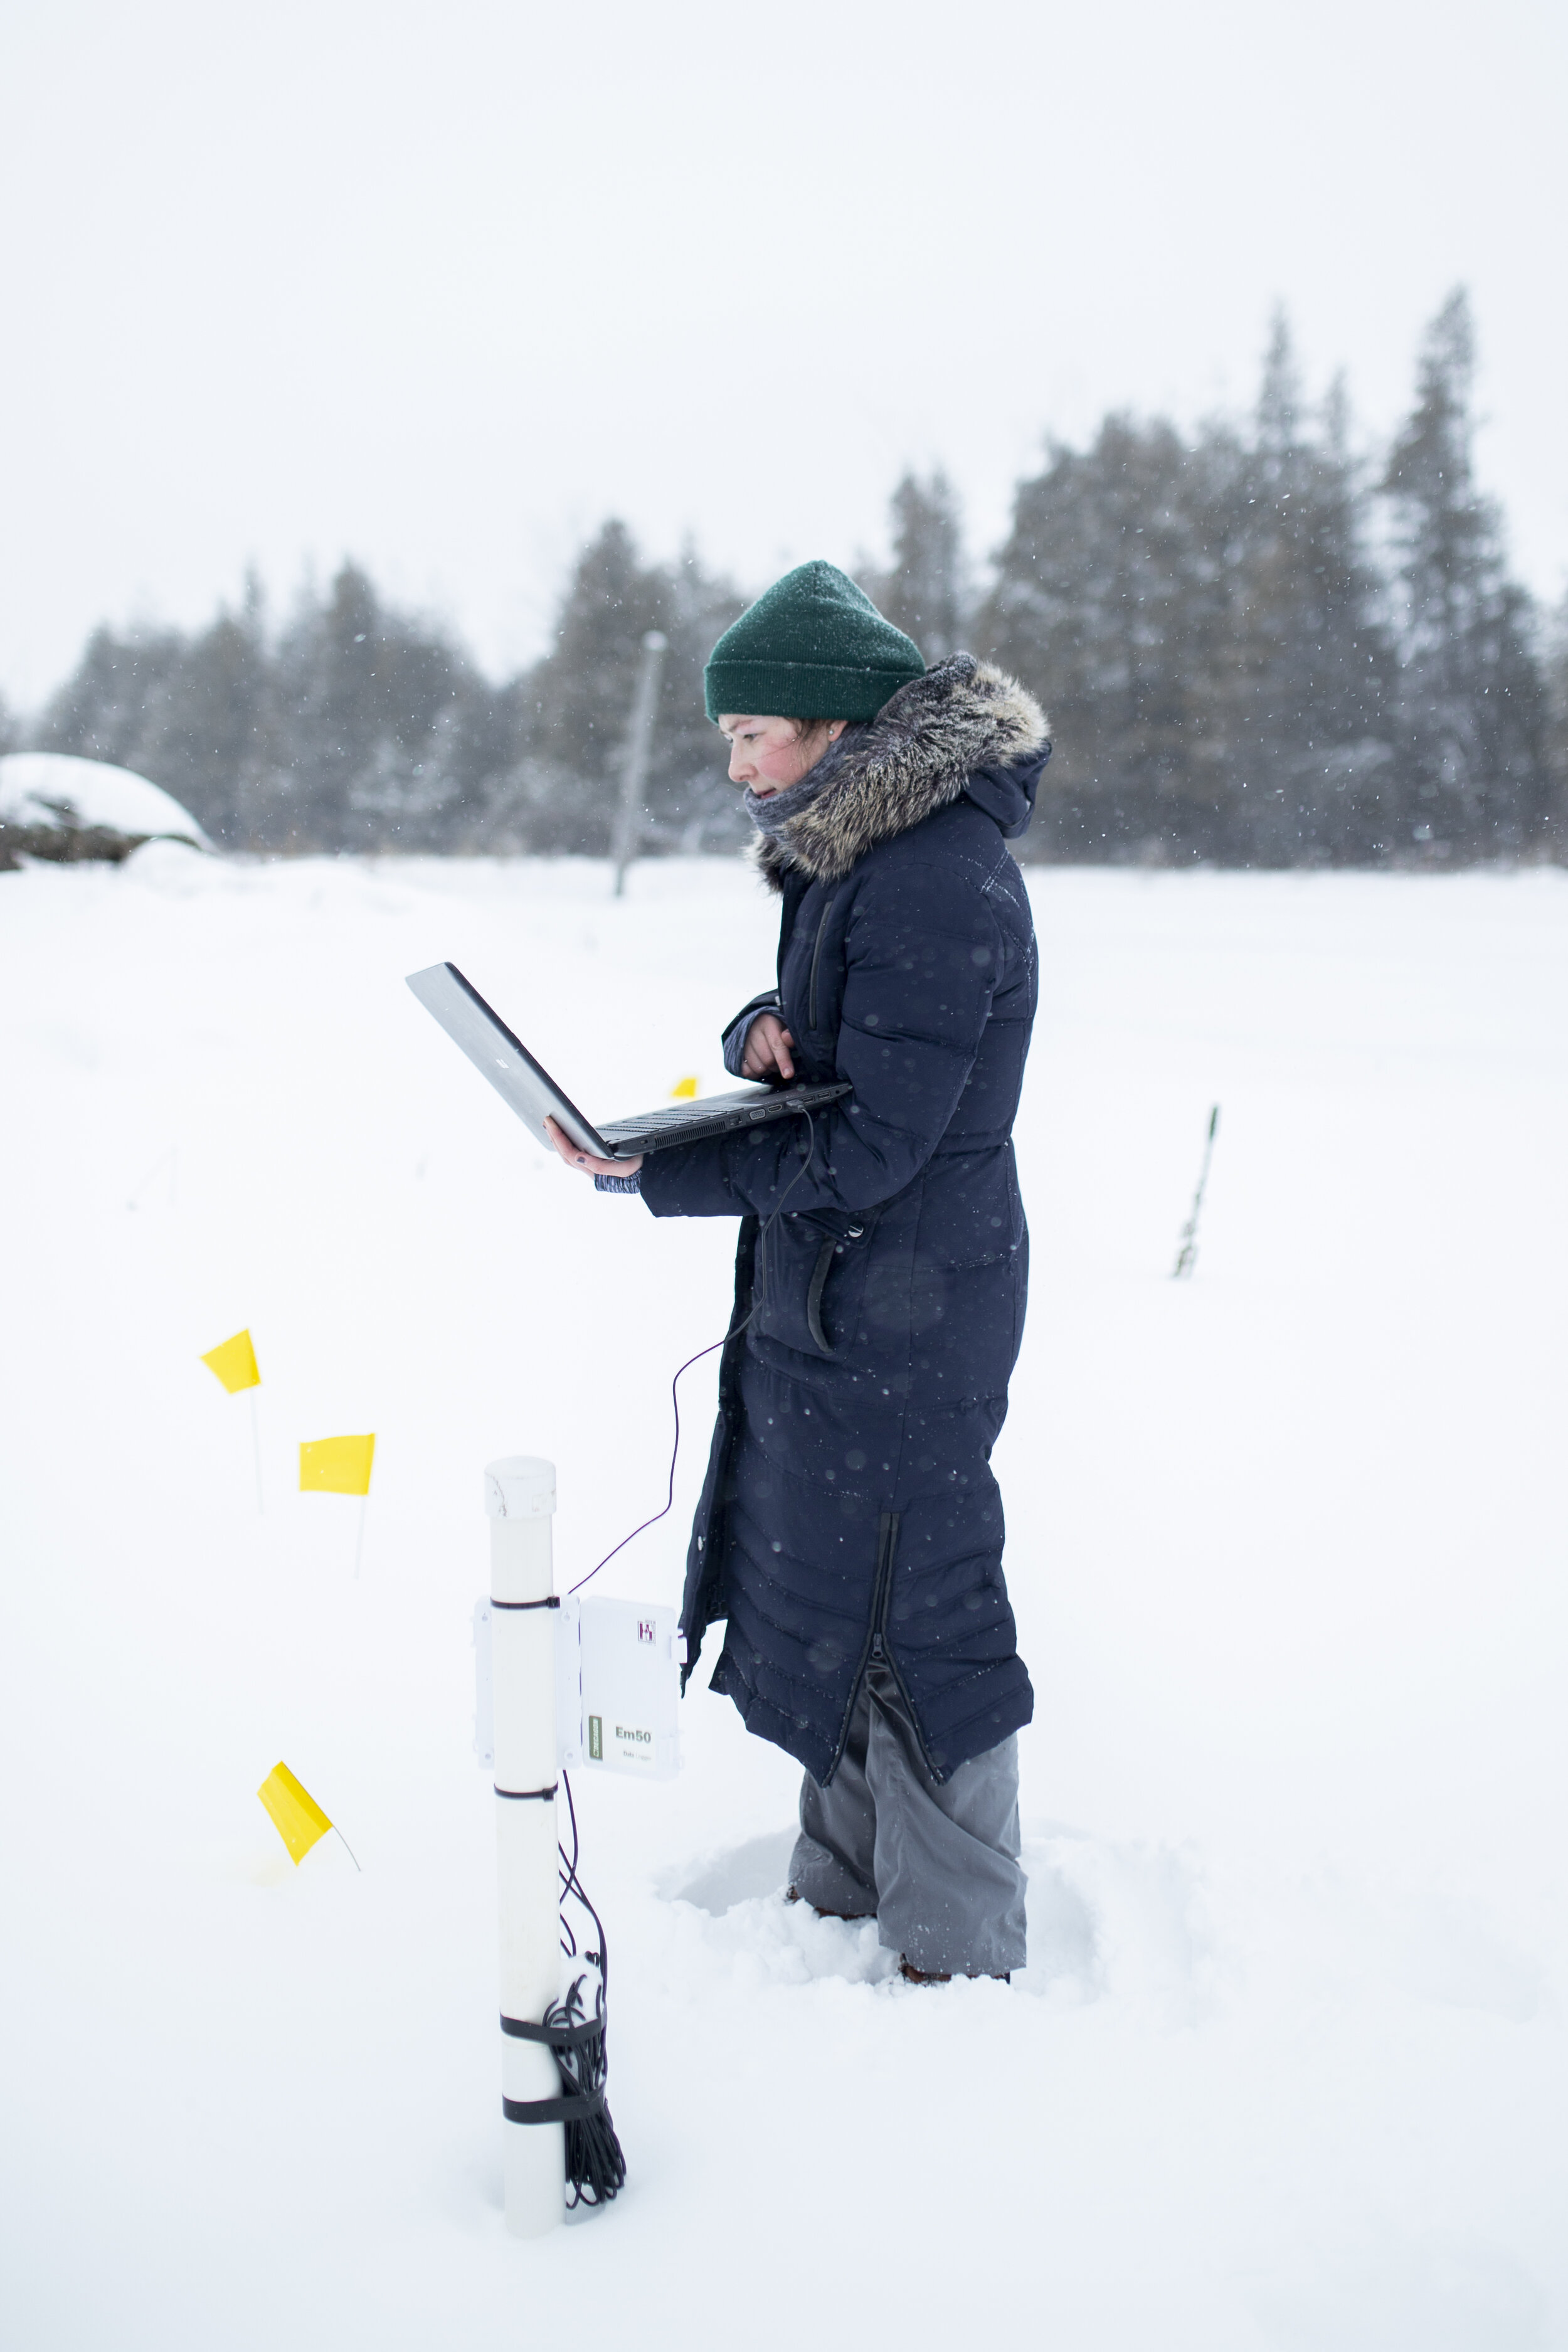  The yellow flags mark different points that contain soil sensors buried beneath the snow, which Wright can then download data from. 